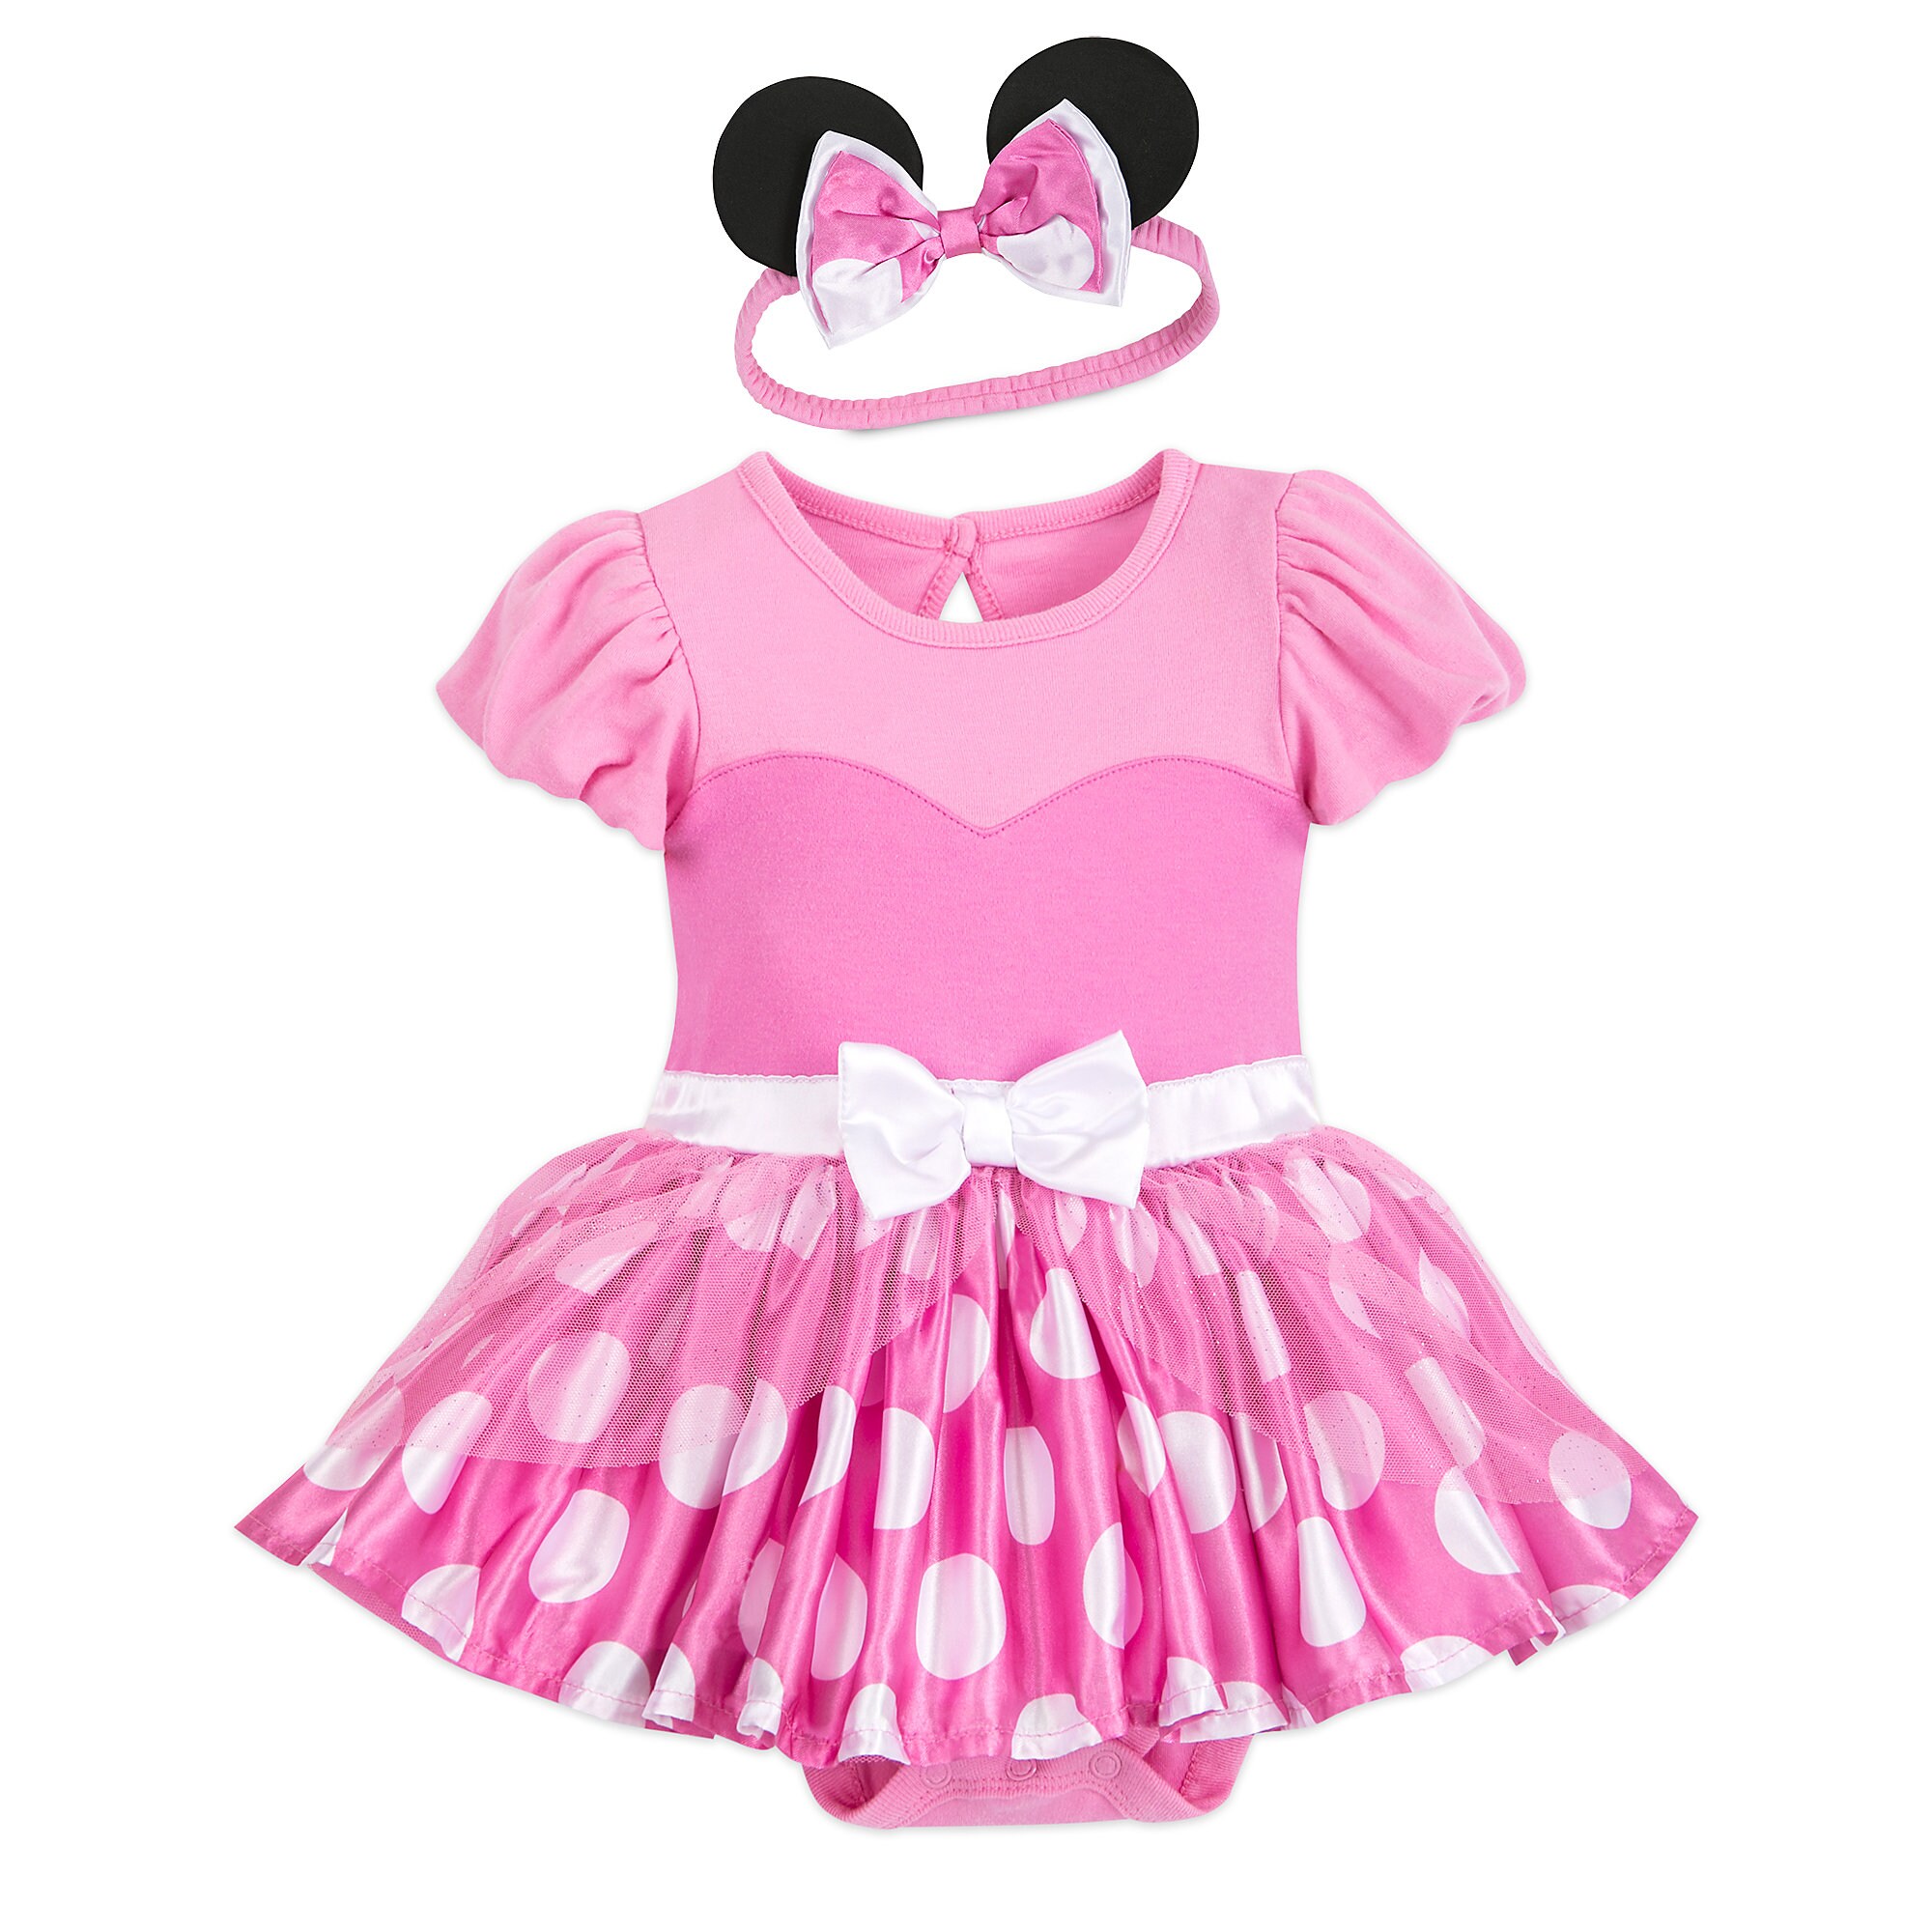 Minnie Mouse Costume Bodysuit for Baby - Pink - Personalized